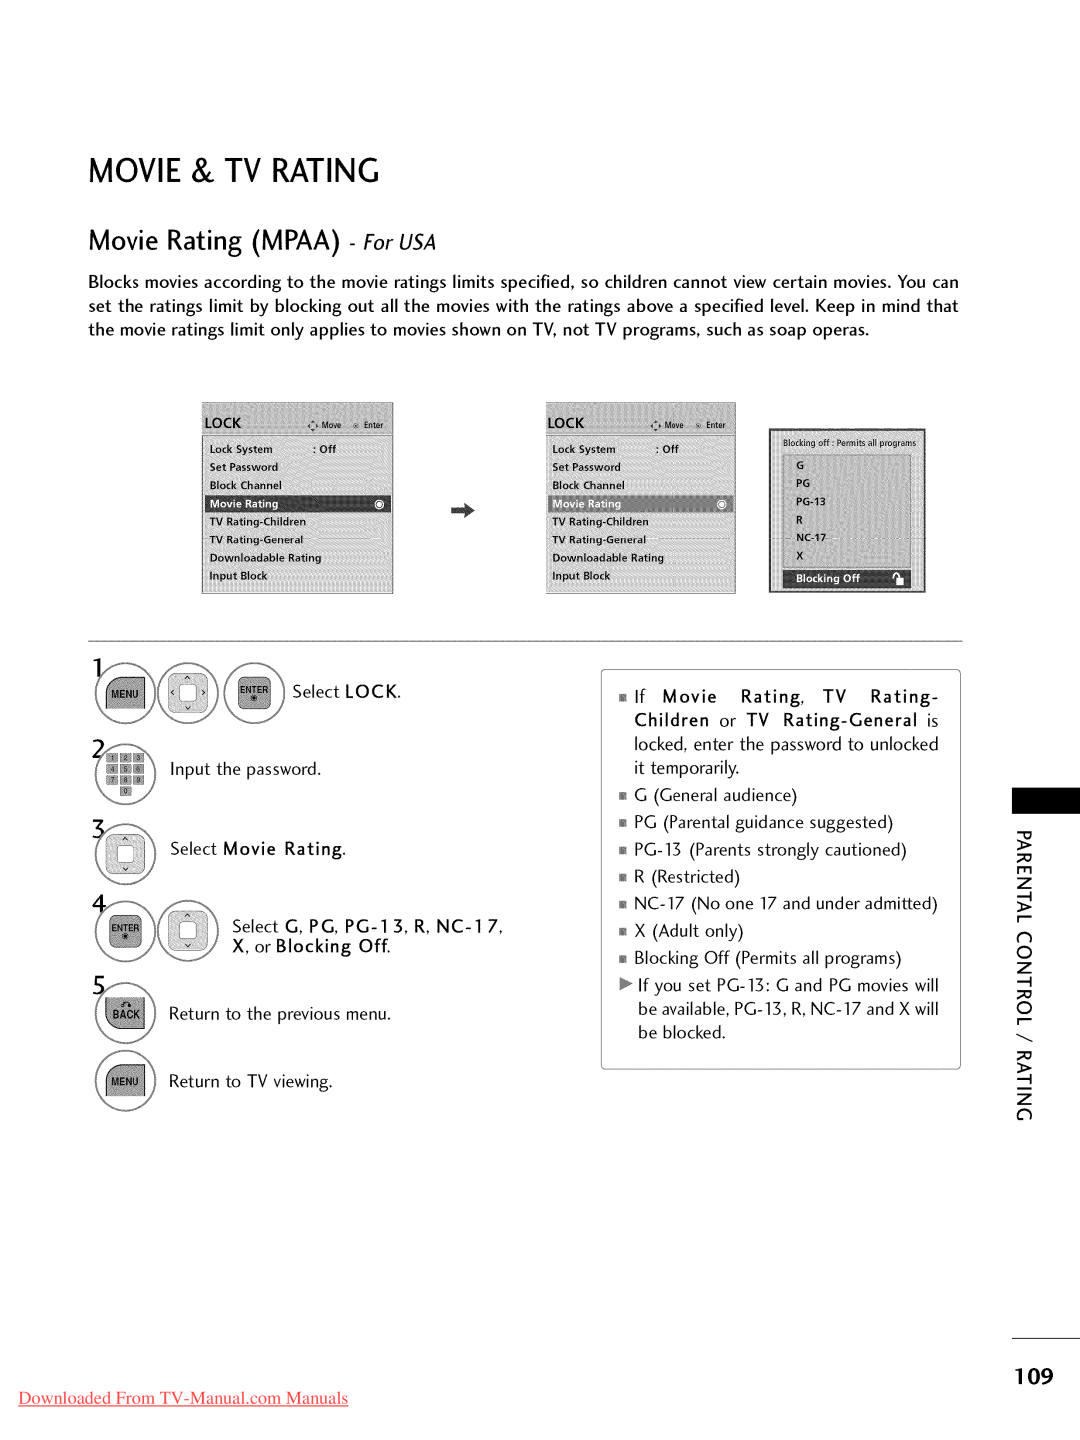 LG Electronics 42LD420 Movie & Tv Rating, Movie Rating MPAA - For USA, i!!i!!i!!i, Downloaded From TV-Manual.com Manuals 